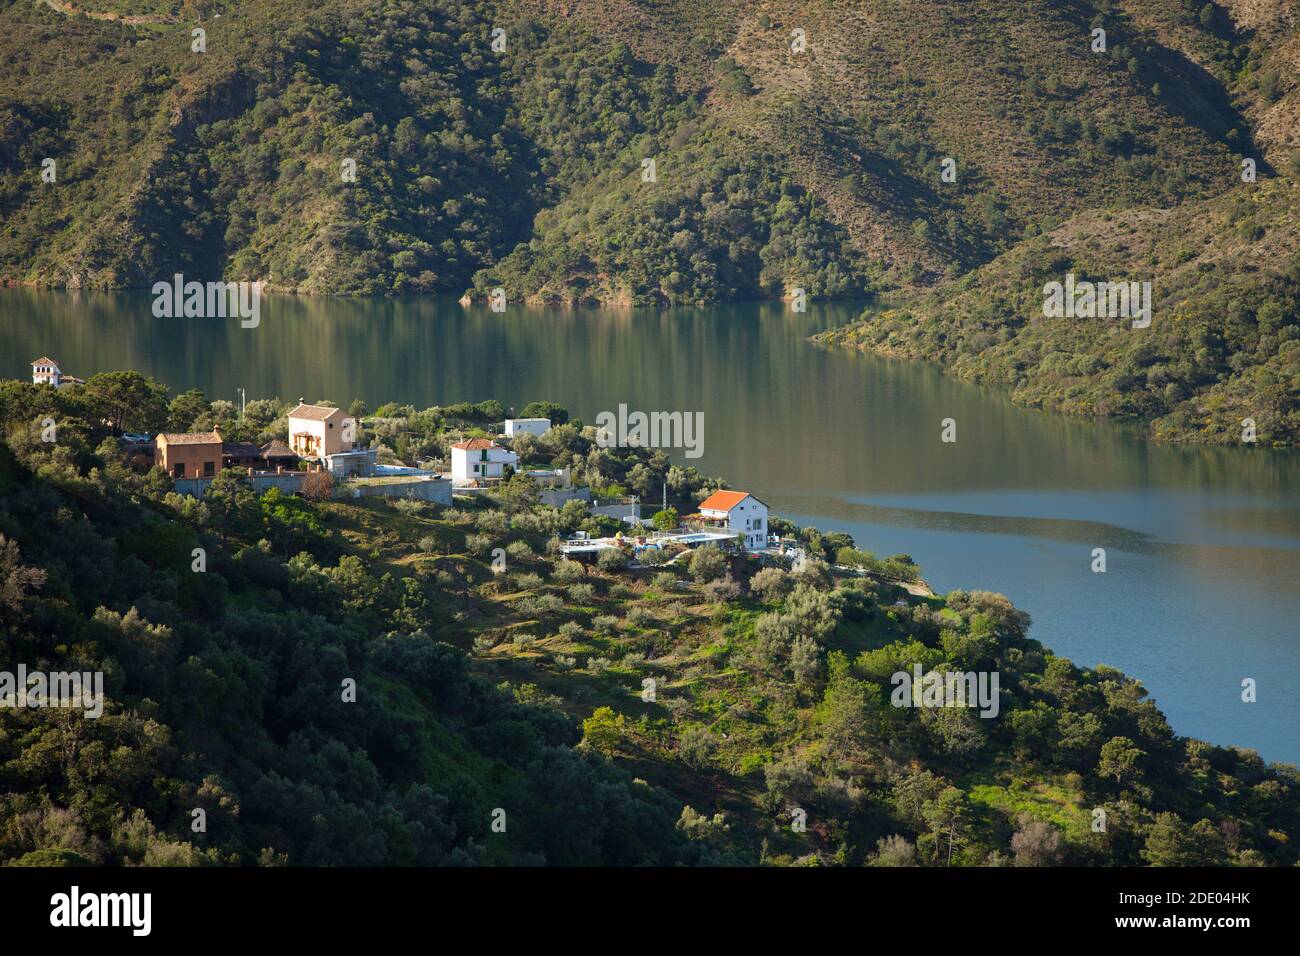 A remote mountain top community in the Rio Verde Valley in Southern Spain Stock Photo